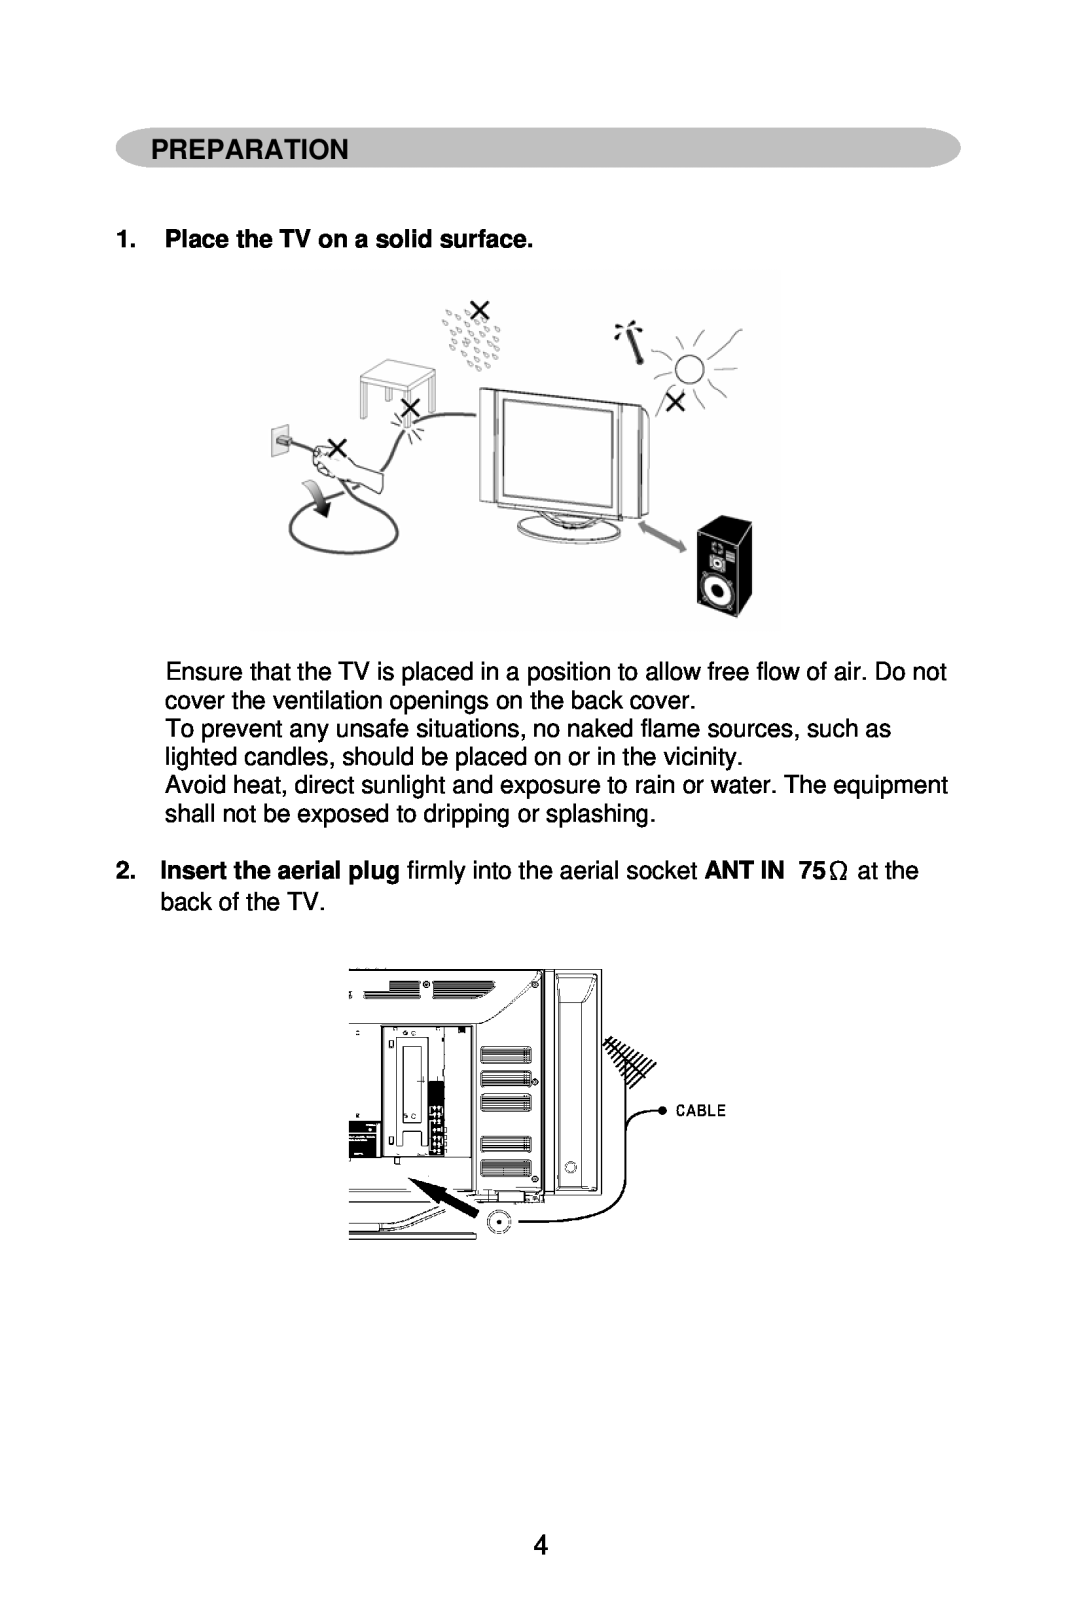 Mitsubishi Electronics DV321 user manual Preparation, Place the TV on a solid surface 